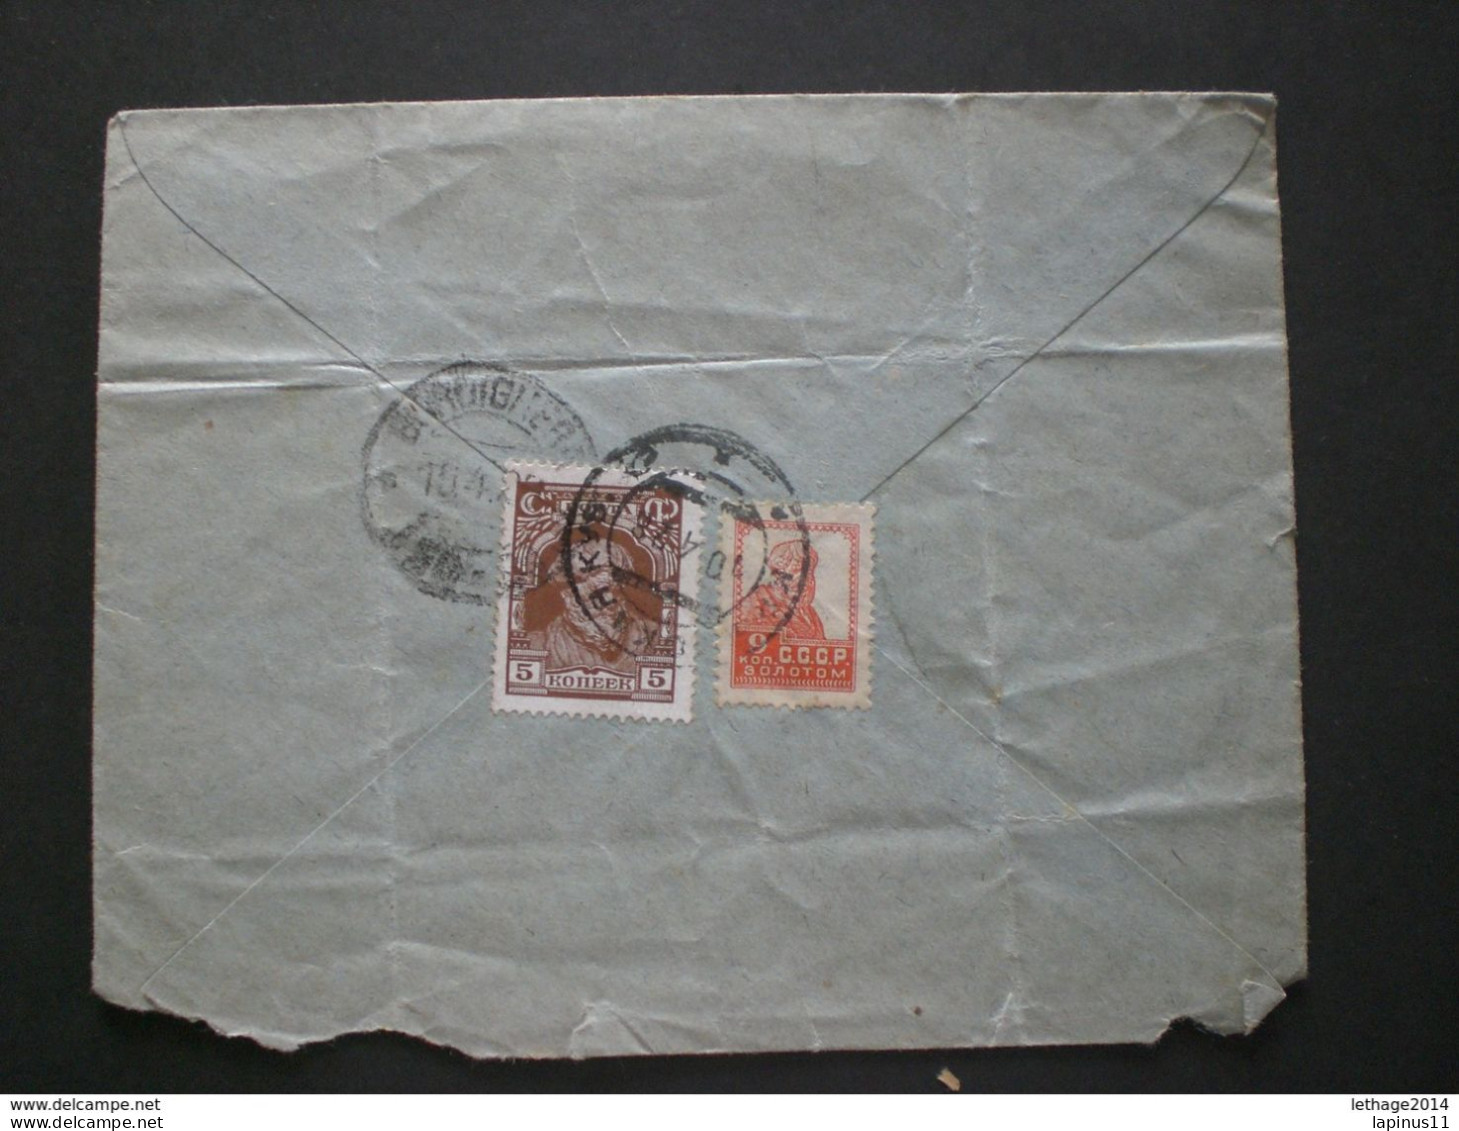 RUSSIA RUSSIE РОССИЯ STAMPS COVER 1928 RUSSLAND TO ITALY RRR RIF. TAGG (175) - Briefe U. Dokumente